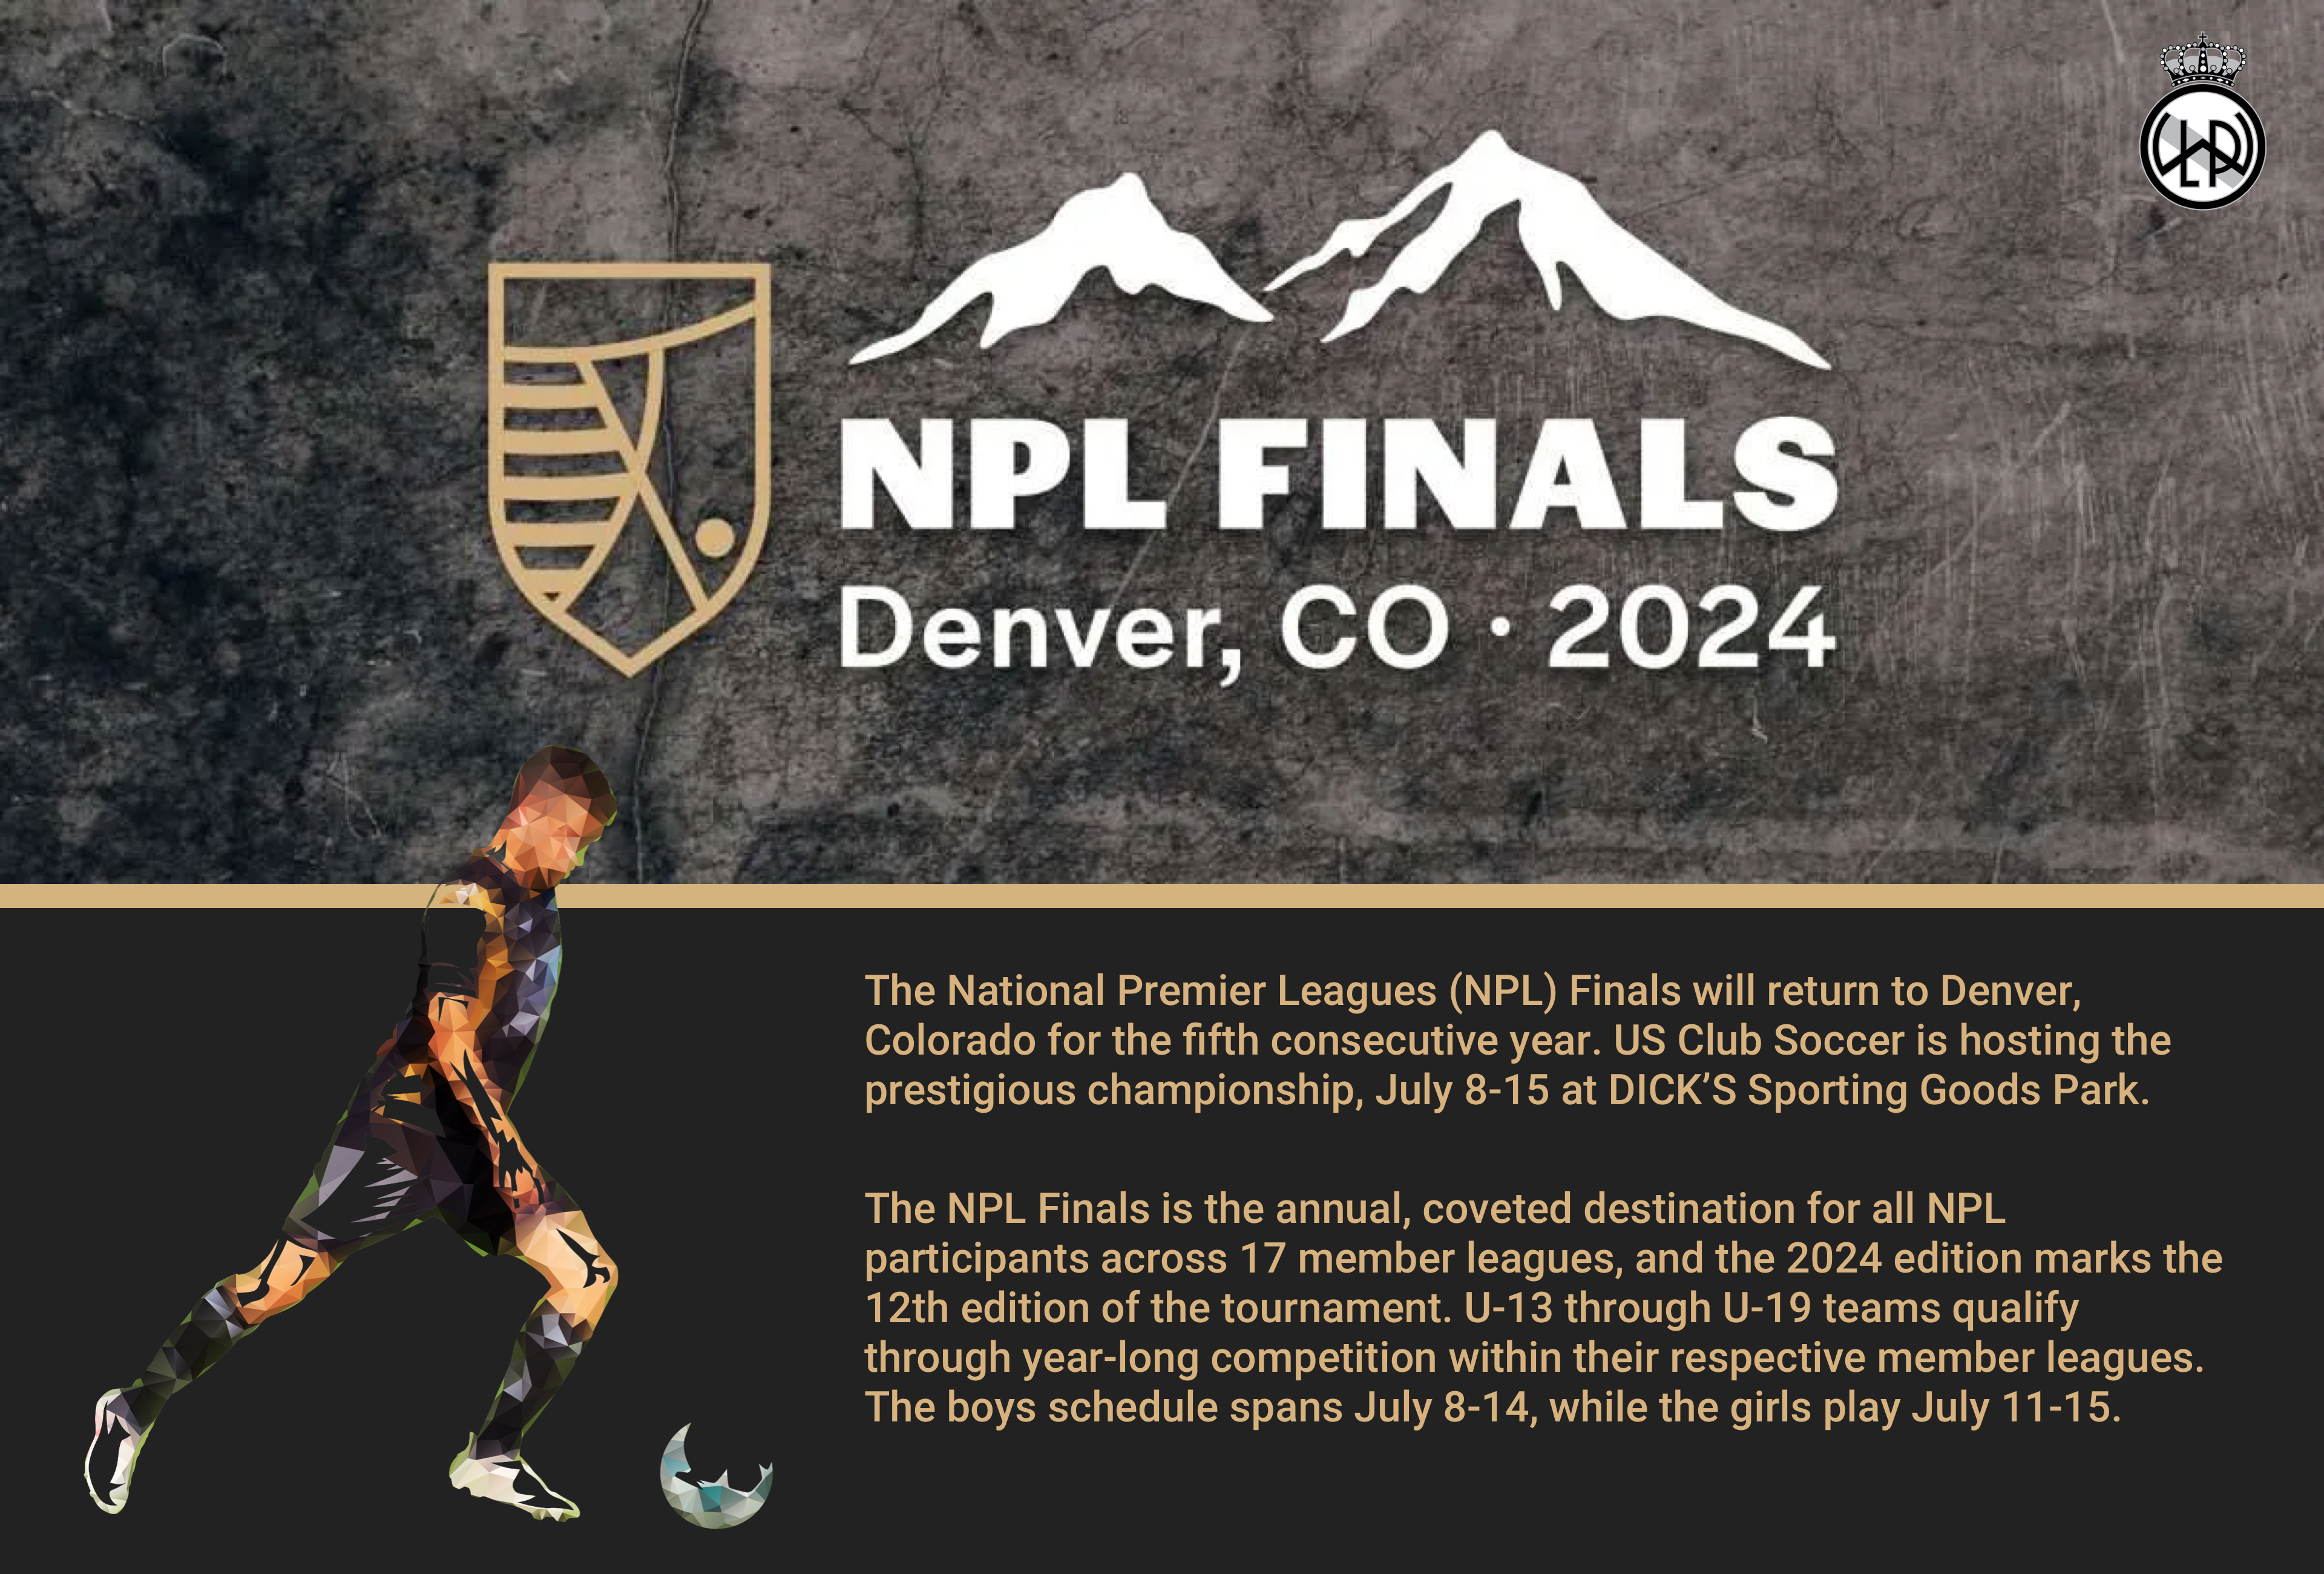 National Premier League logo and NPL finals in Colorado; dates between July 8 and 15, 2024.